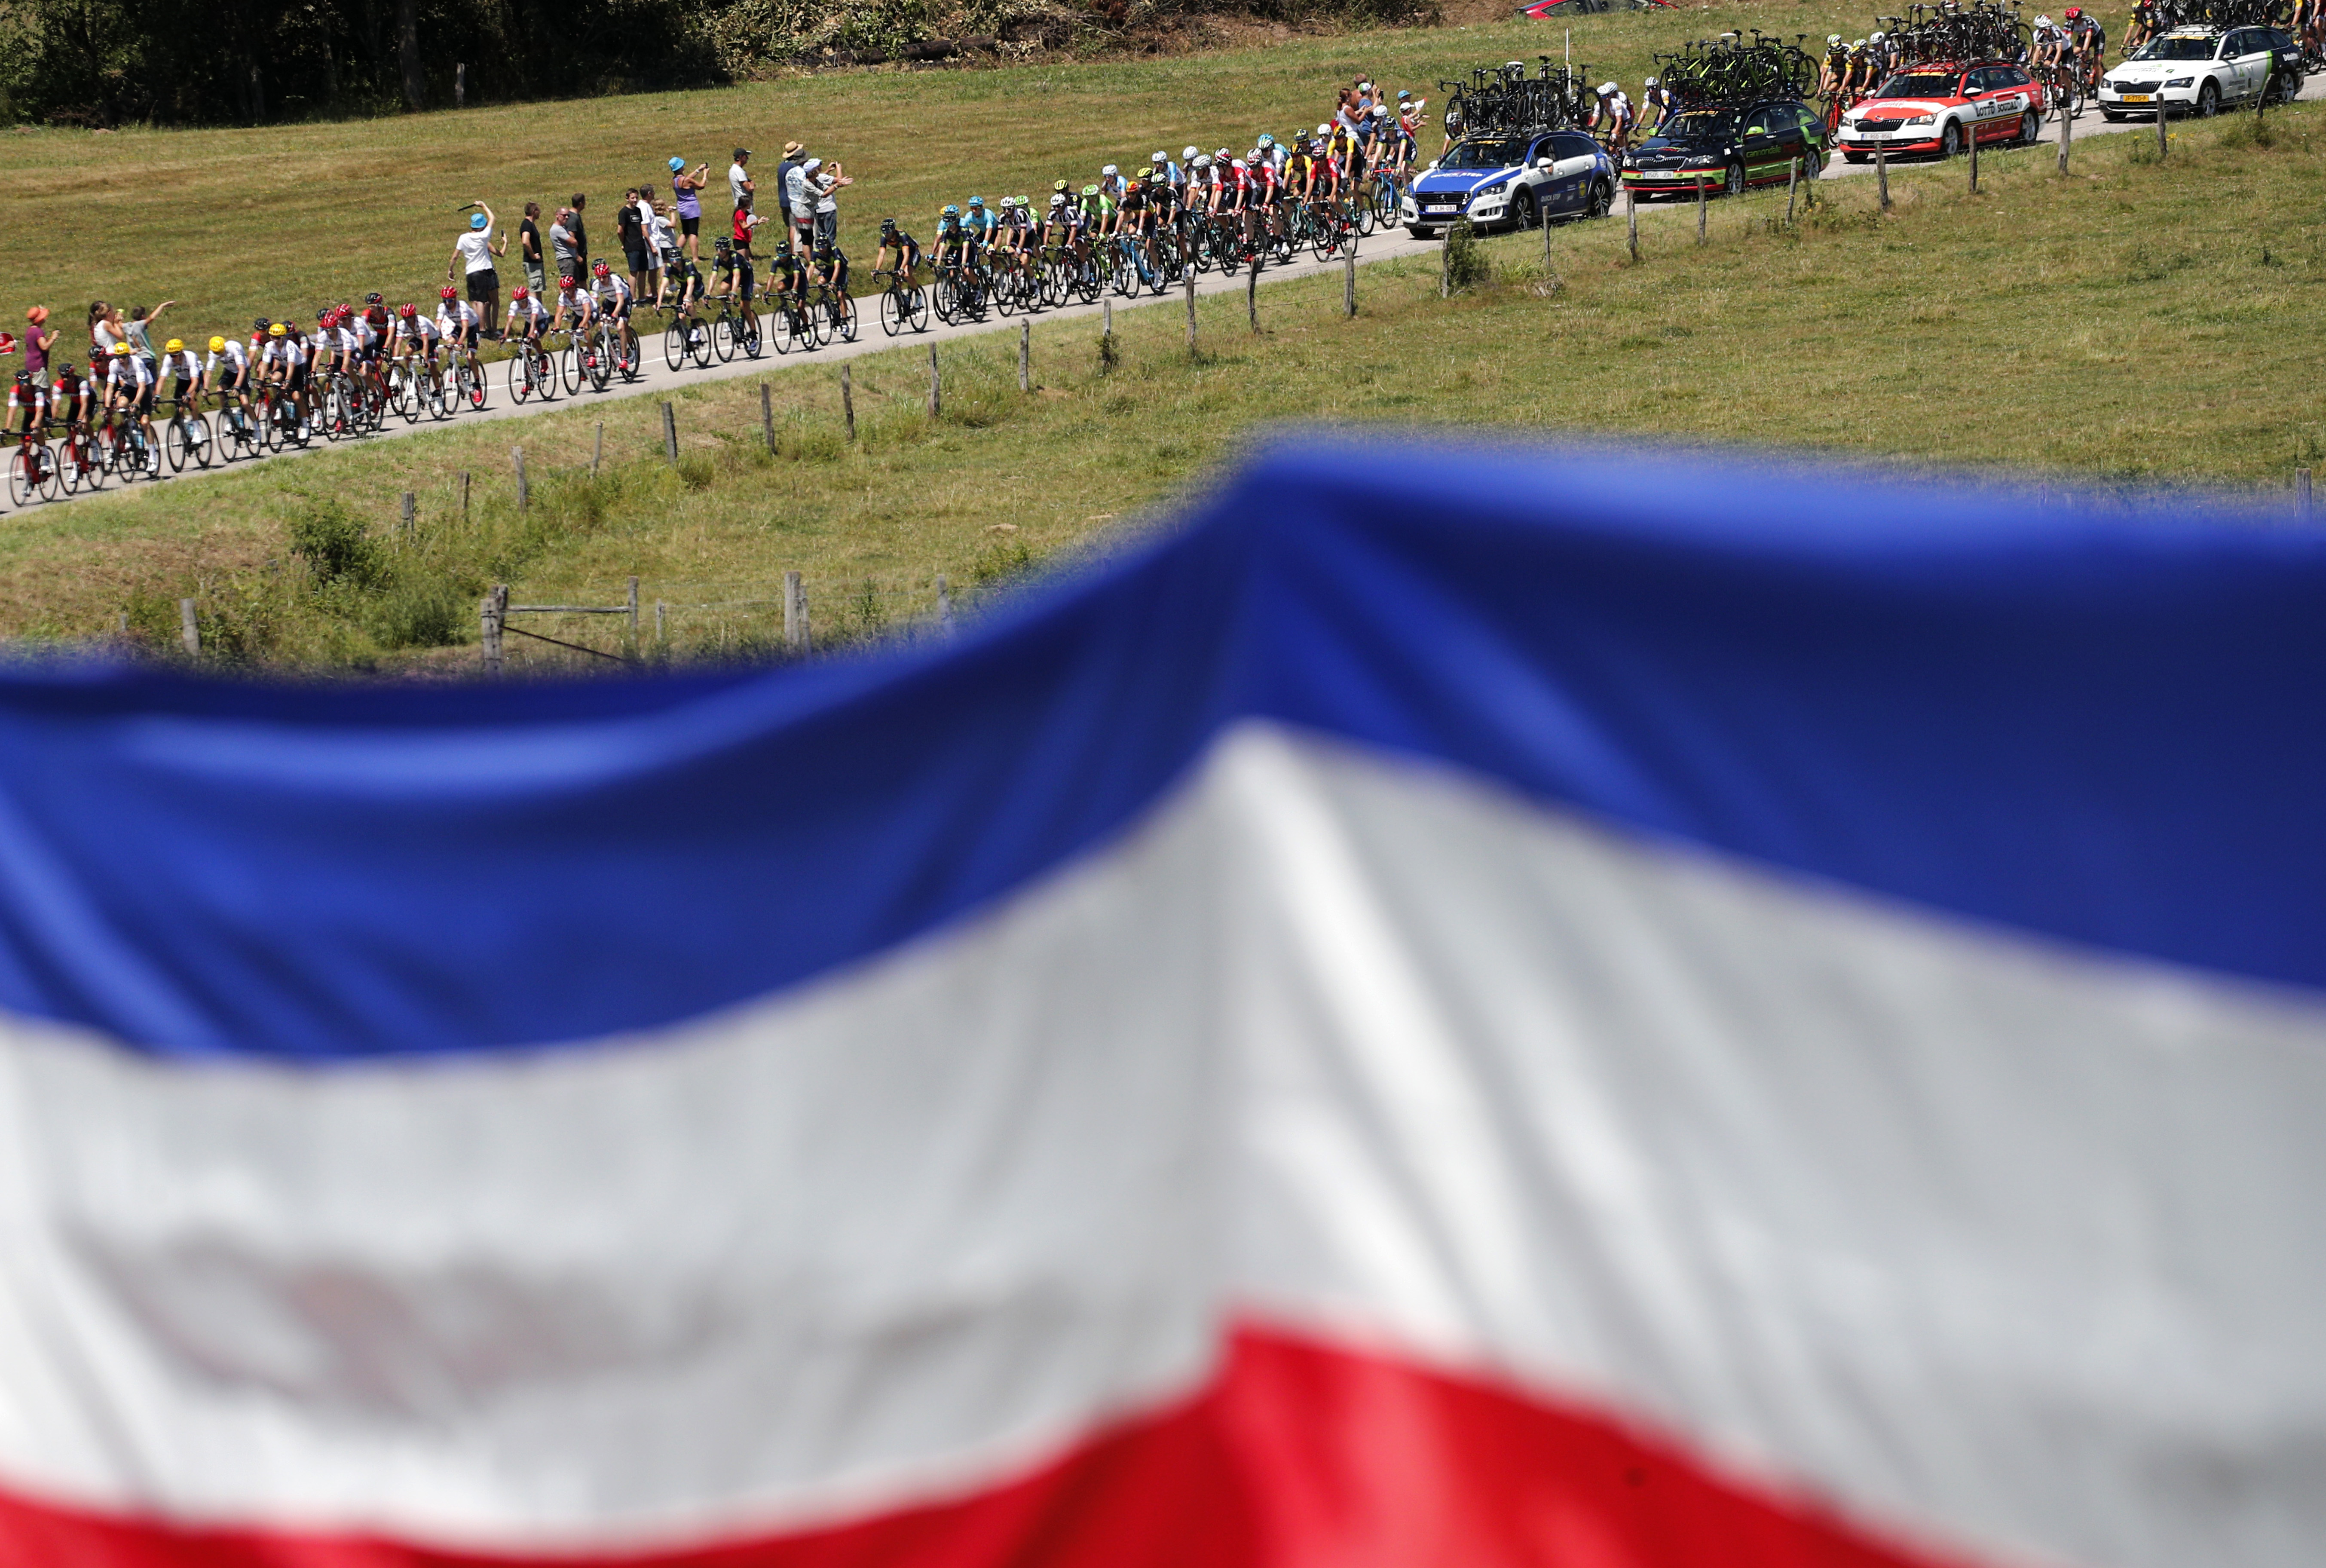 A french flag hangs from a fence as the pack approaches during the fifth stage of the Tour de France cycling race over 160.5 kilometers (99.7 miles) with start in Vittel and finish in La Planche des Belles Filles, France, Wednesday, July 5, 2017. (AP Photo/Christophe Ena)